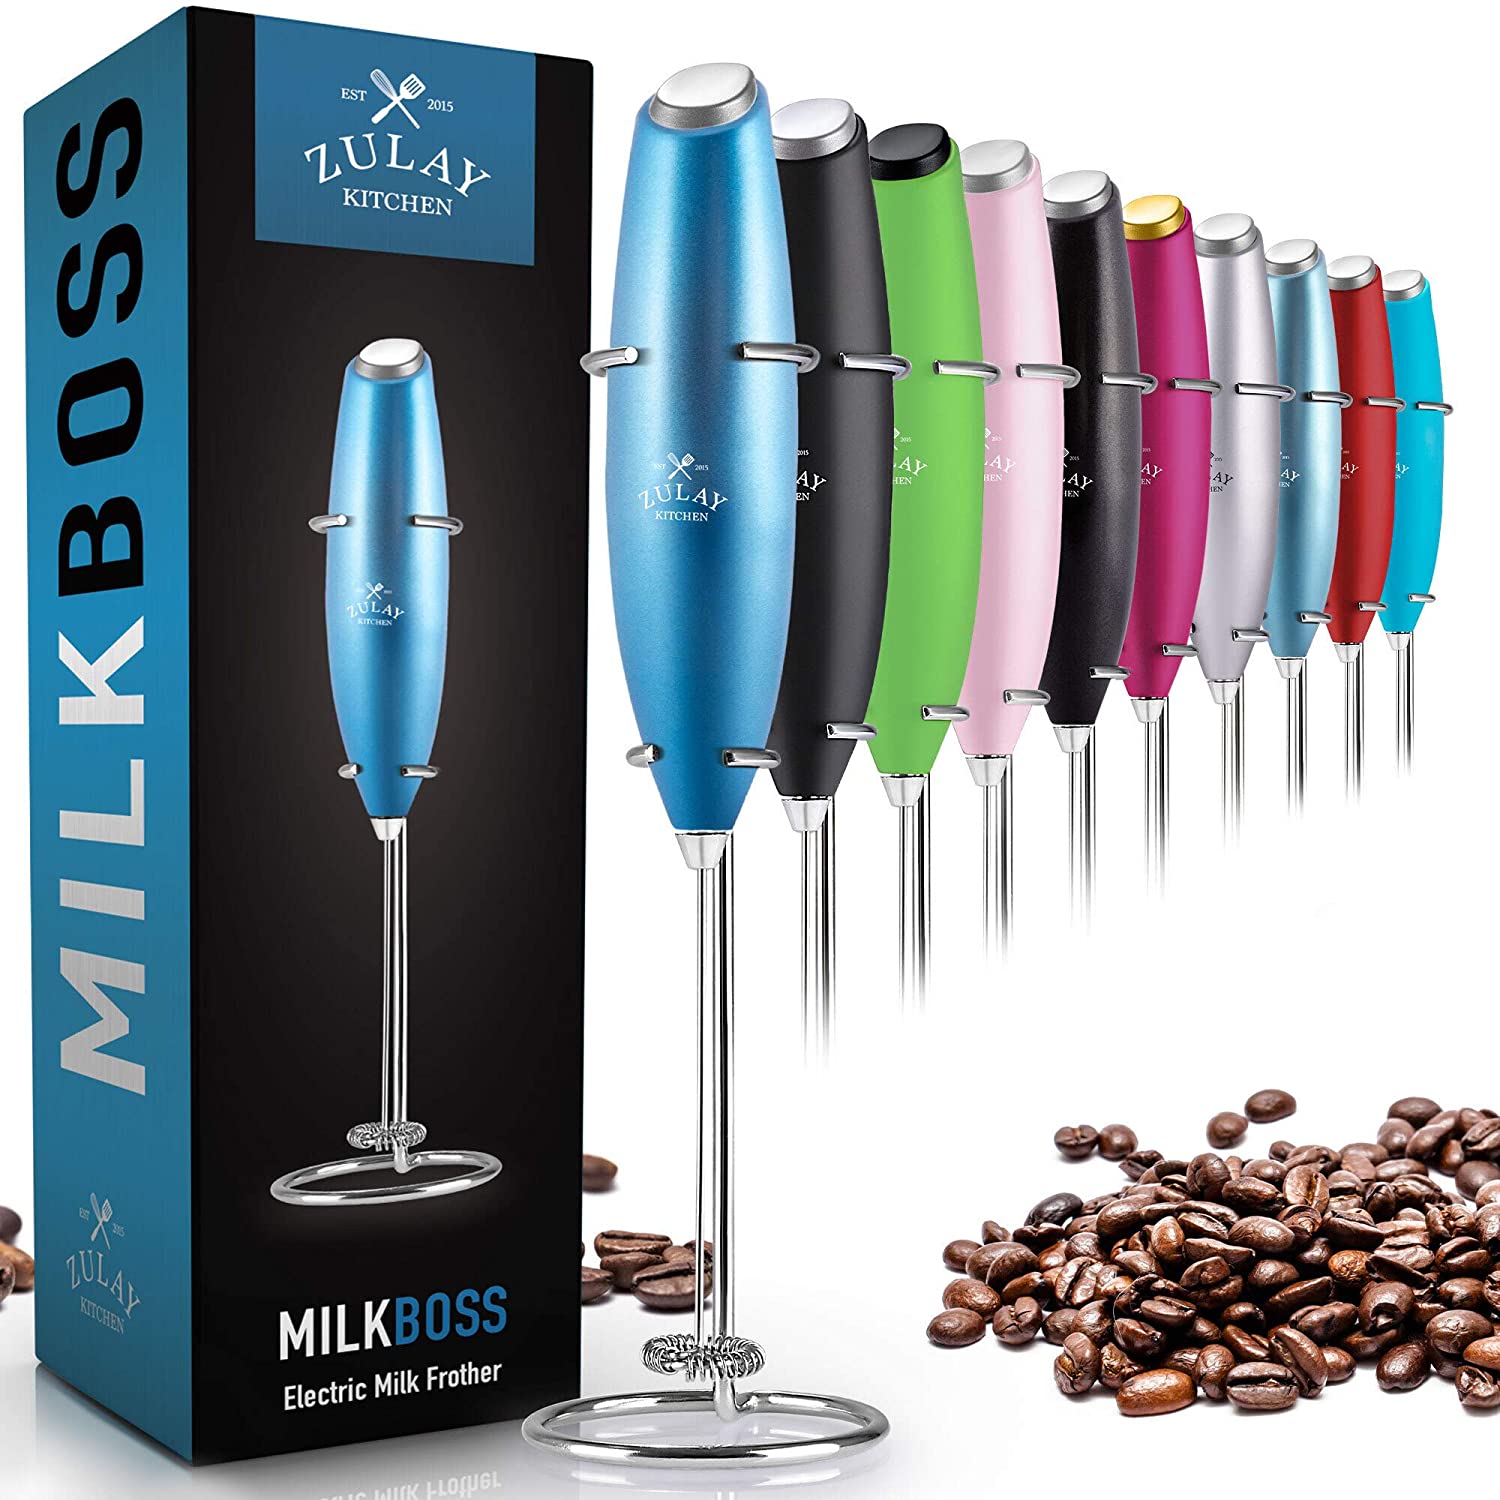 Zulay Milk Frother Review - can thousands of 5-star reviews be WRONG? 